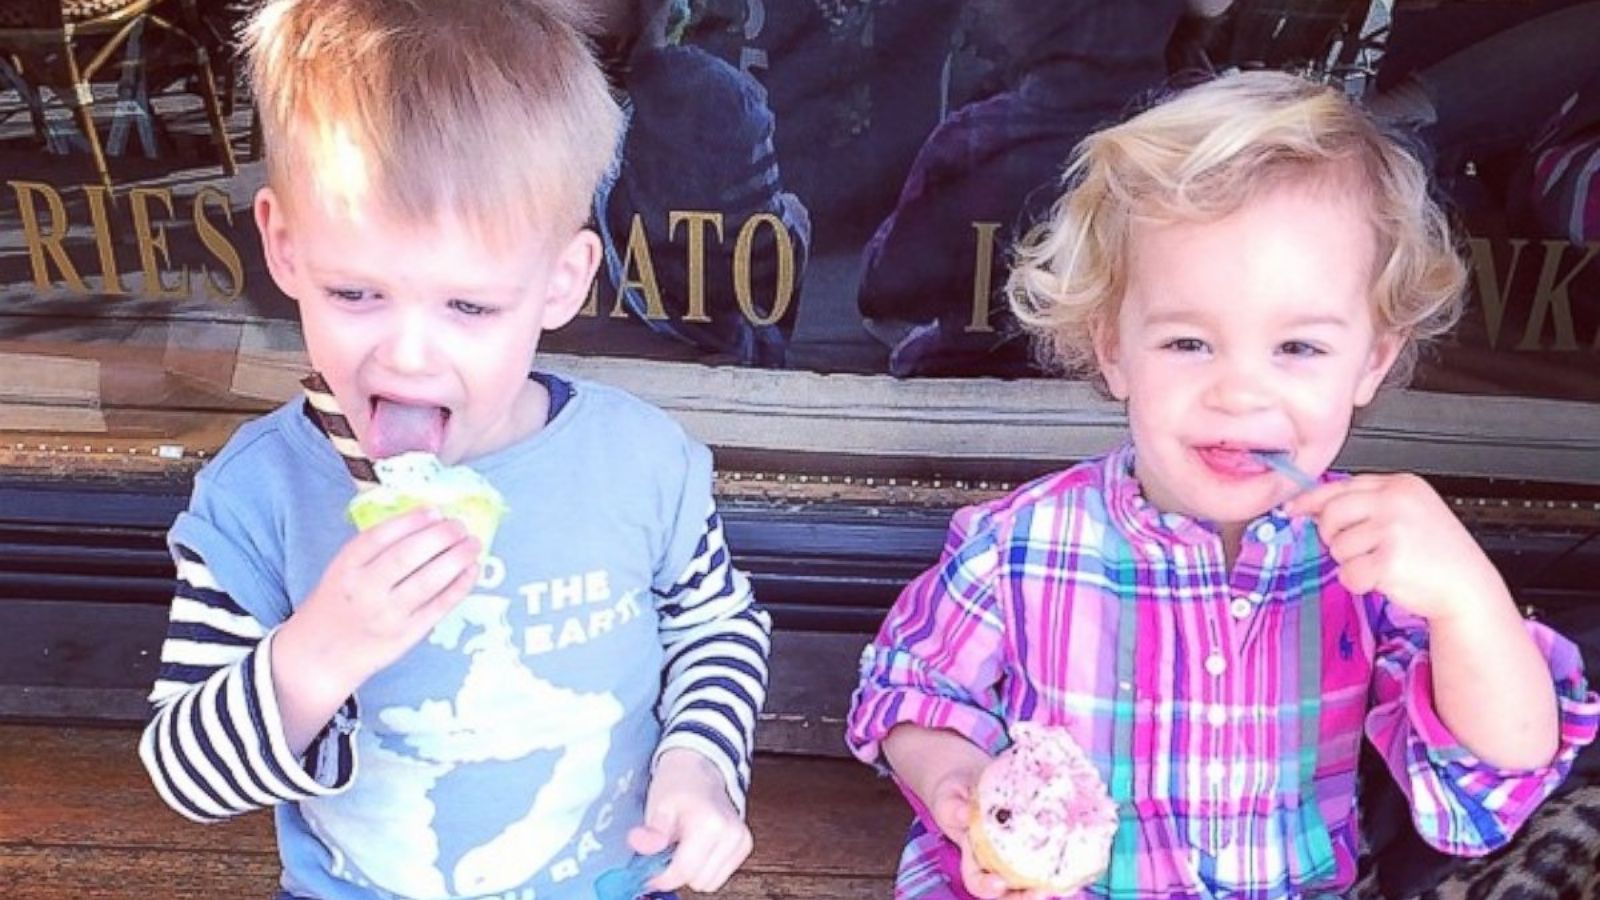 Jessica Simpson's daughter plays with BFF CaCee Cobb's daughter